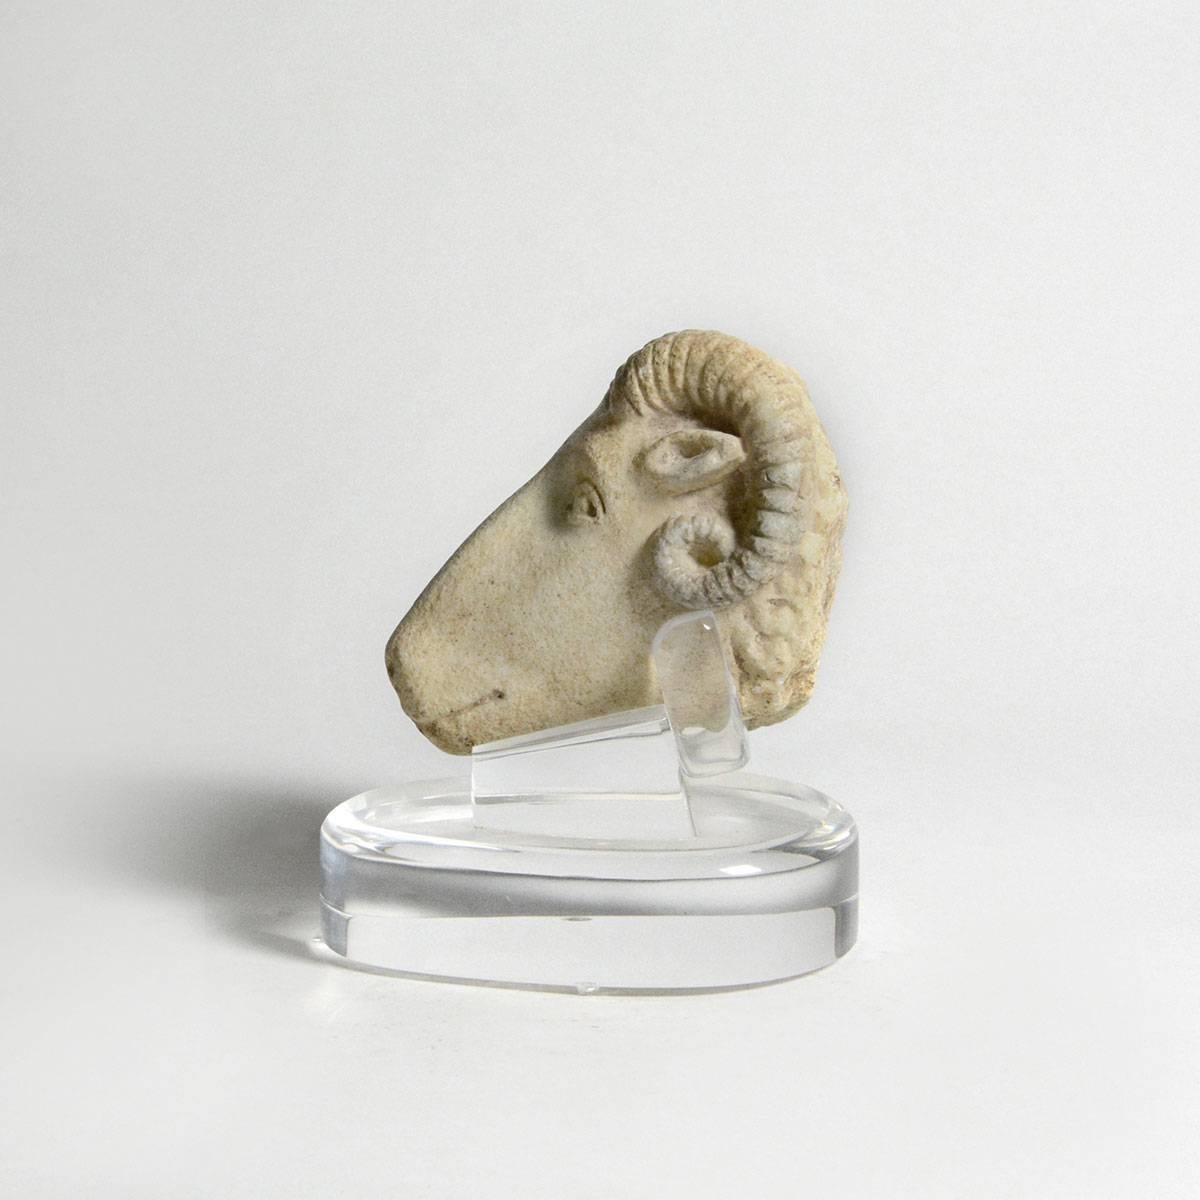 This well-modeled head of a ram captures the essence of the animal with the articulated ridge running across the top of its snout. This feature gives prominence to its nostrils and mouth. Its eyes are carefully modeled as are its horns and